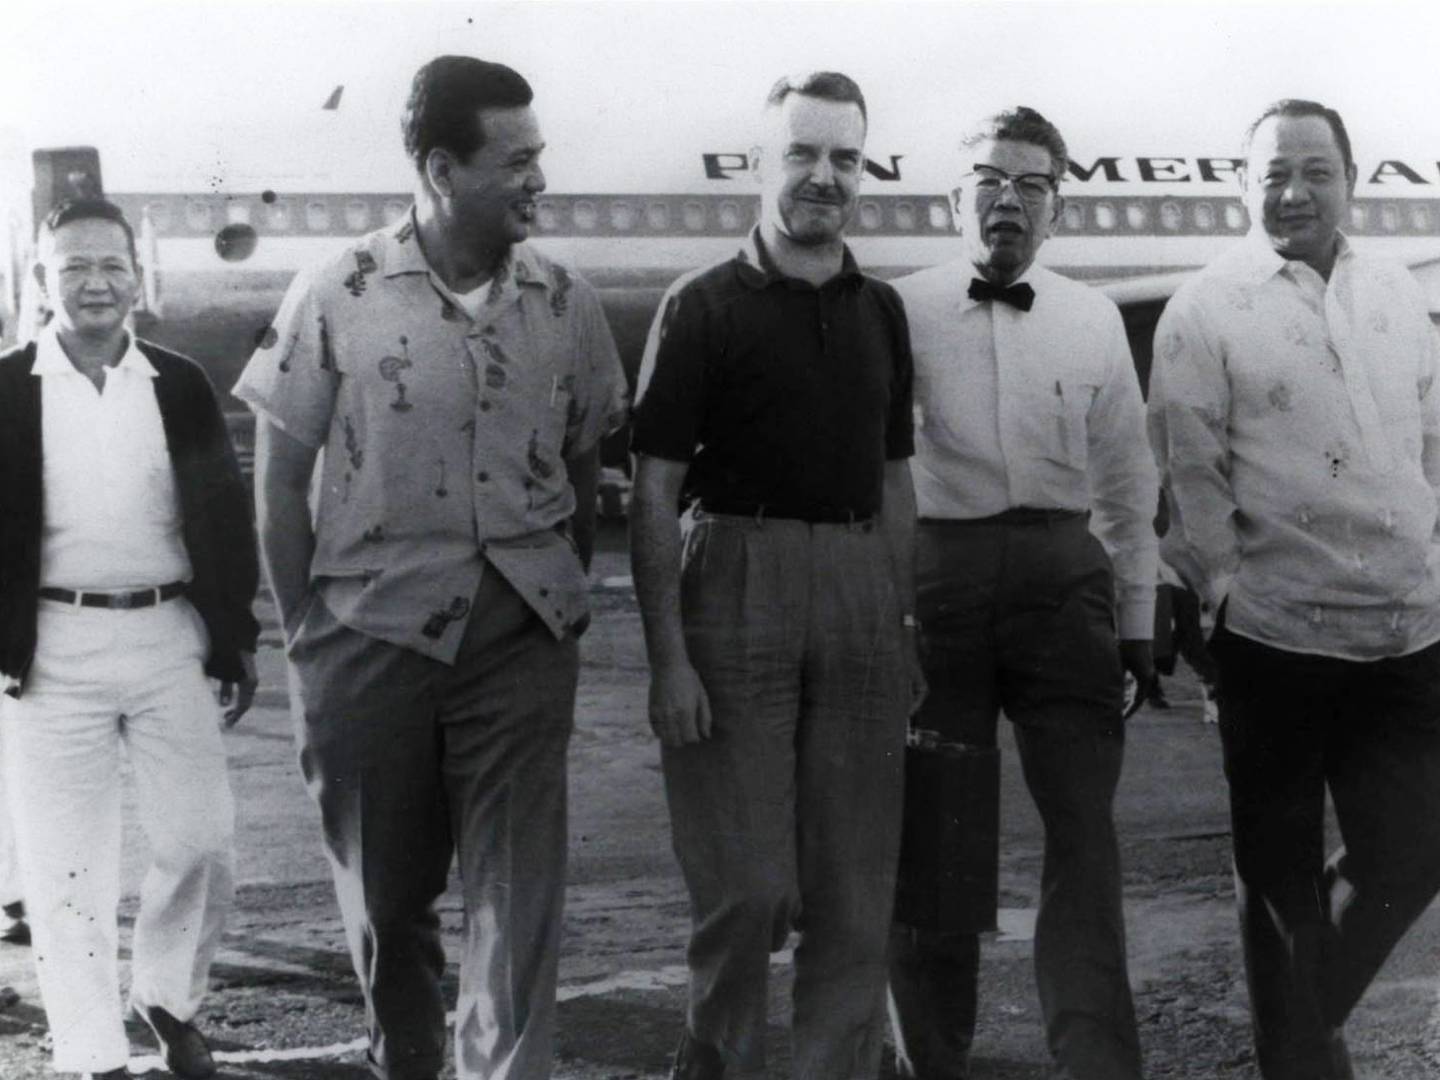 From left: Dario Arellano, Manny Manahan, Edward Lansdale, Johnny Orendain and Oscar Arellano at Manila International Airport, in December 1960. Photo: Muir S. Fairchild Research Information Centre, Maxwell Air Force Base